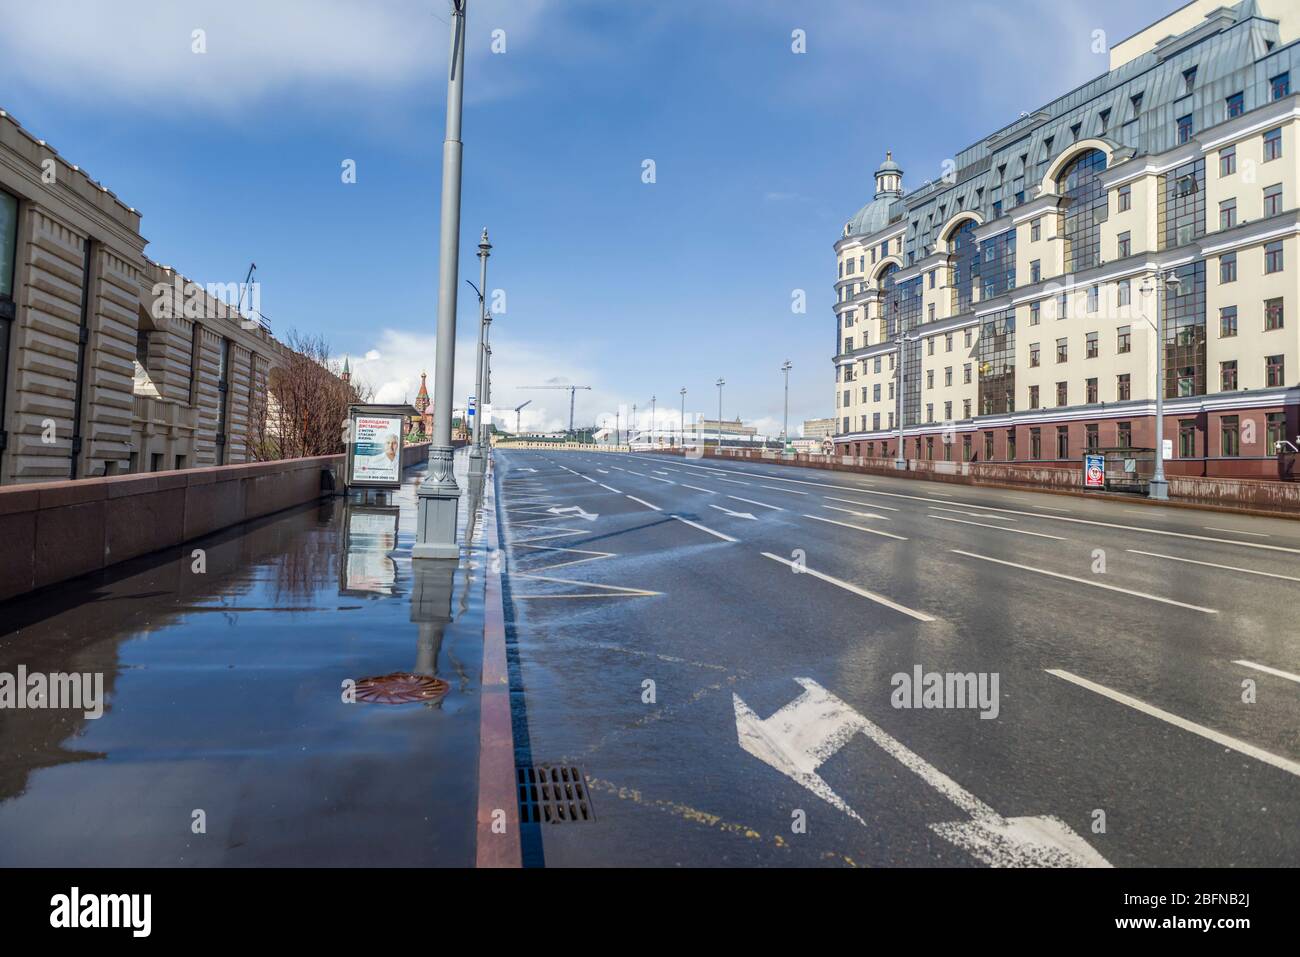 Russia April 19 High Resolution Stock Photography And Images Alamy - ru the city of moscowrussia roblox